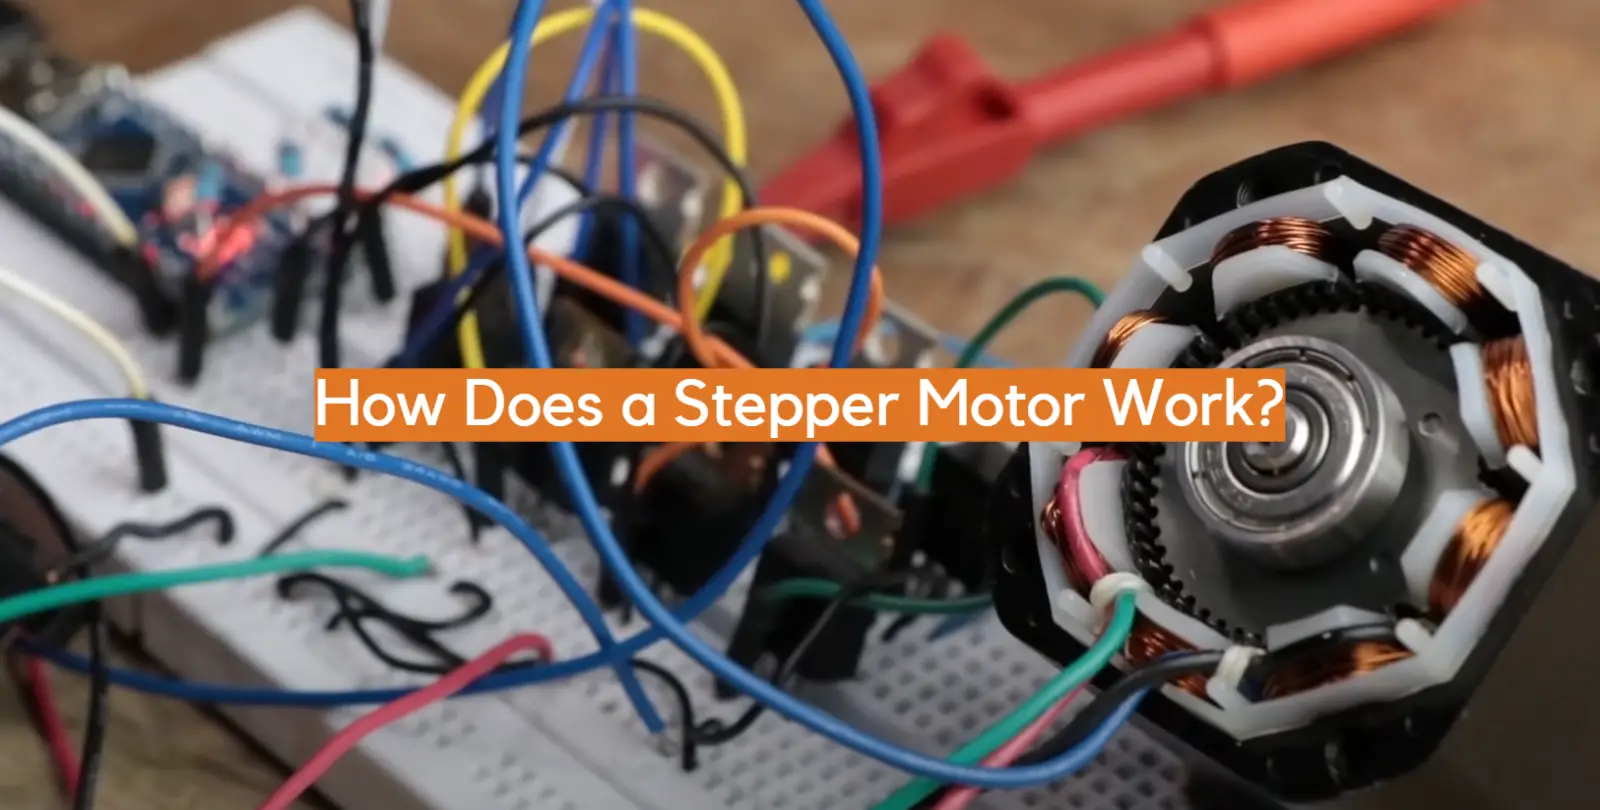 How Does a Stepper Motor Work?